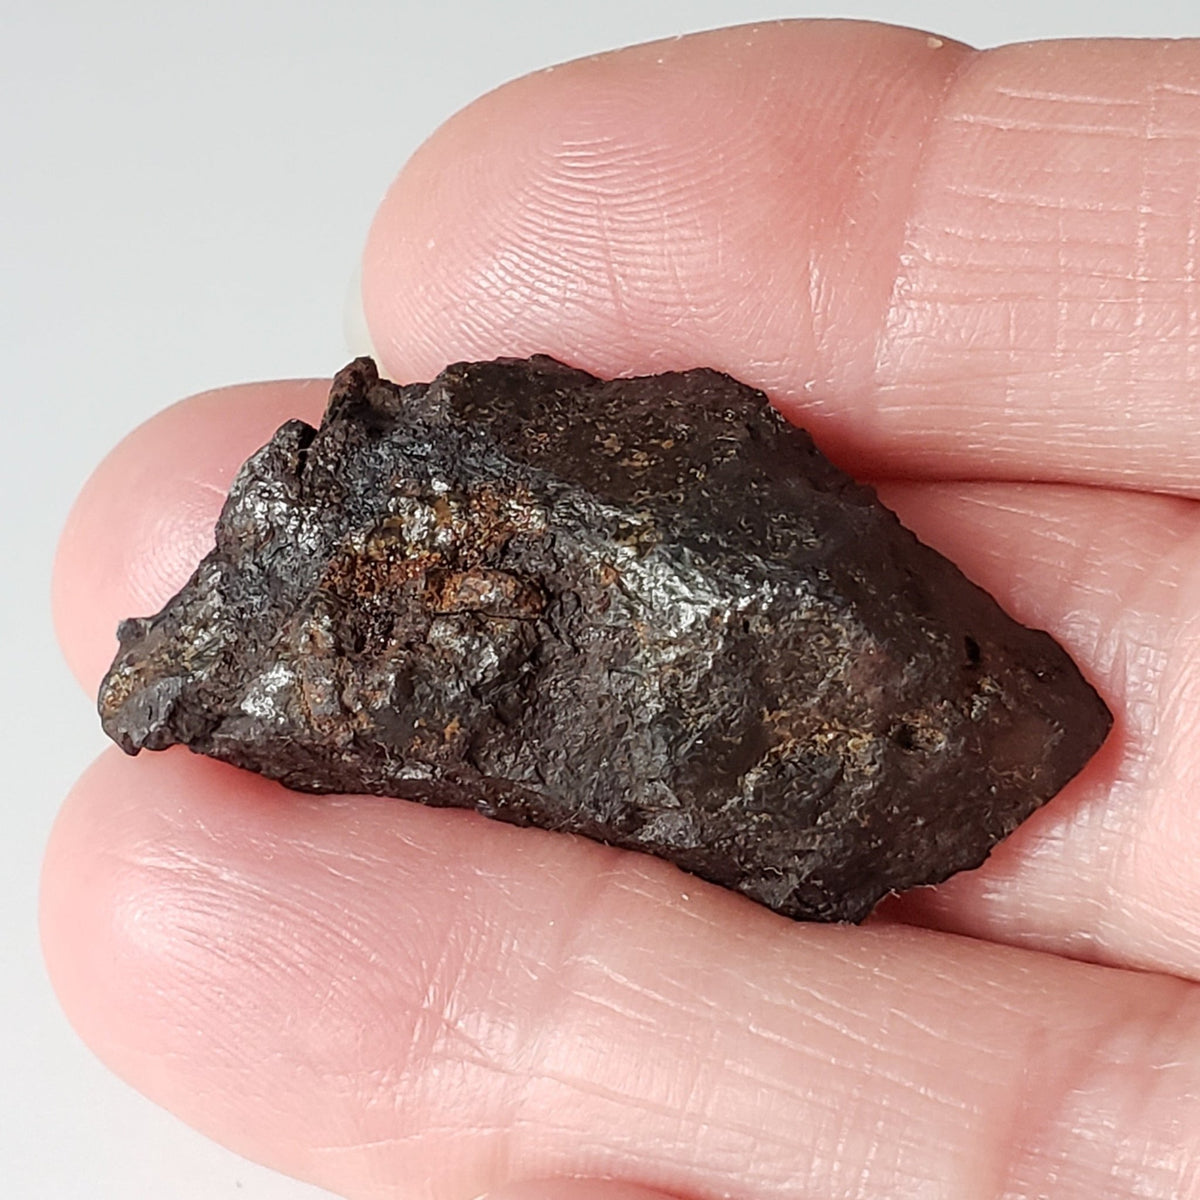 Toluca Meteorite | 17.96 grams | Etched End Cut | Iron IAB-sLL | Xiquipilco, Mexico